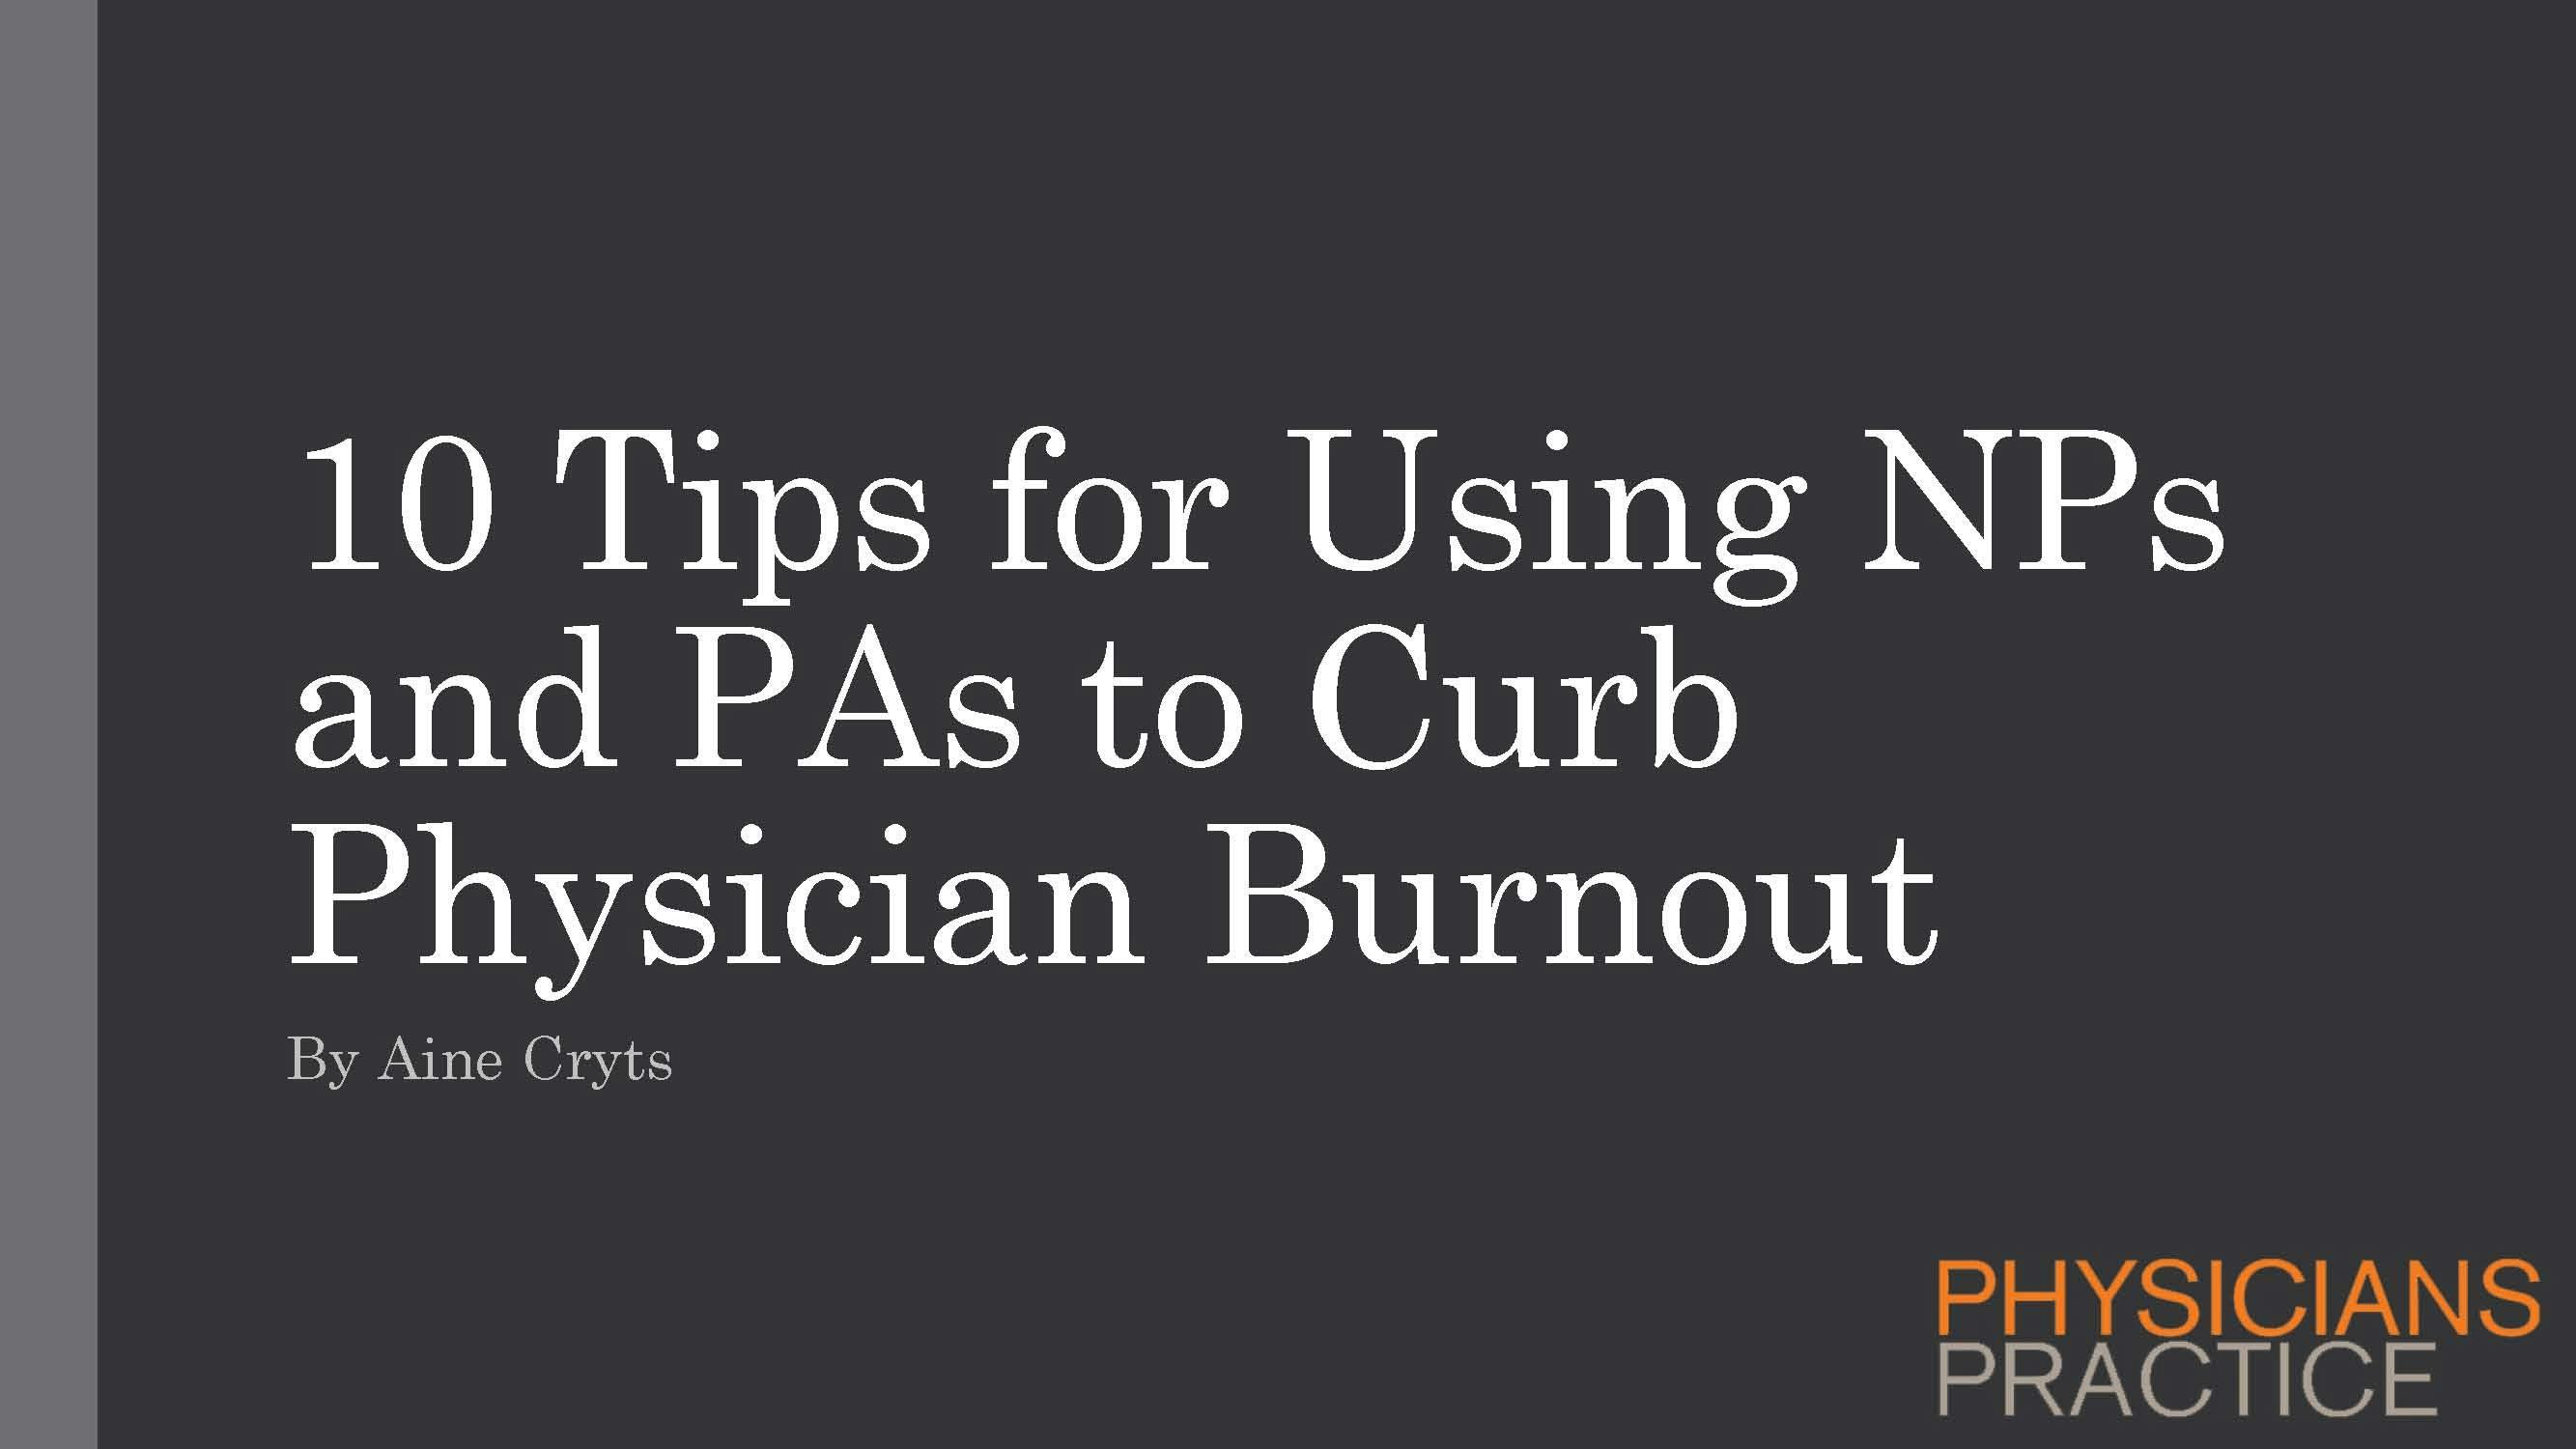 10 Tips for Using NPs and PAs to Curb Physician Burnout